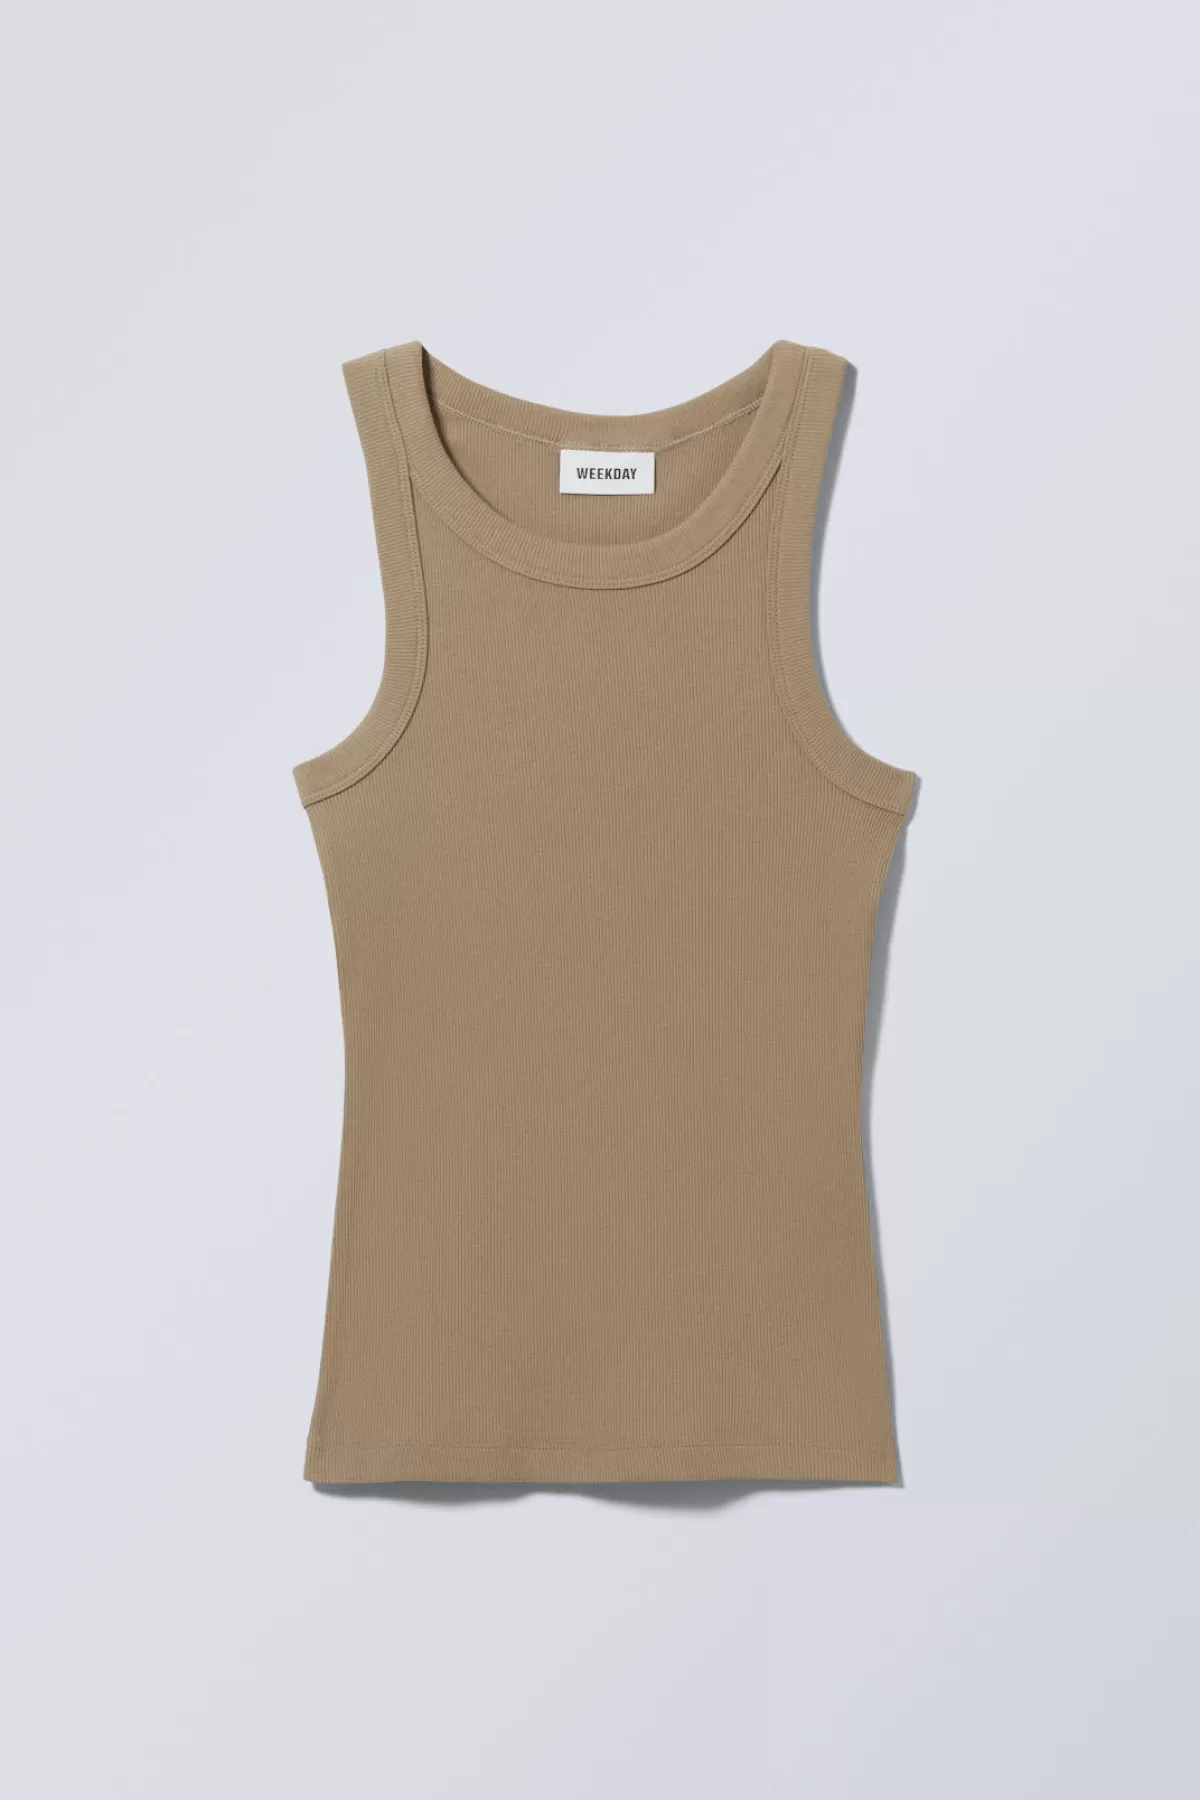 Weekday Fitted Rib Tank Top Brown Shop